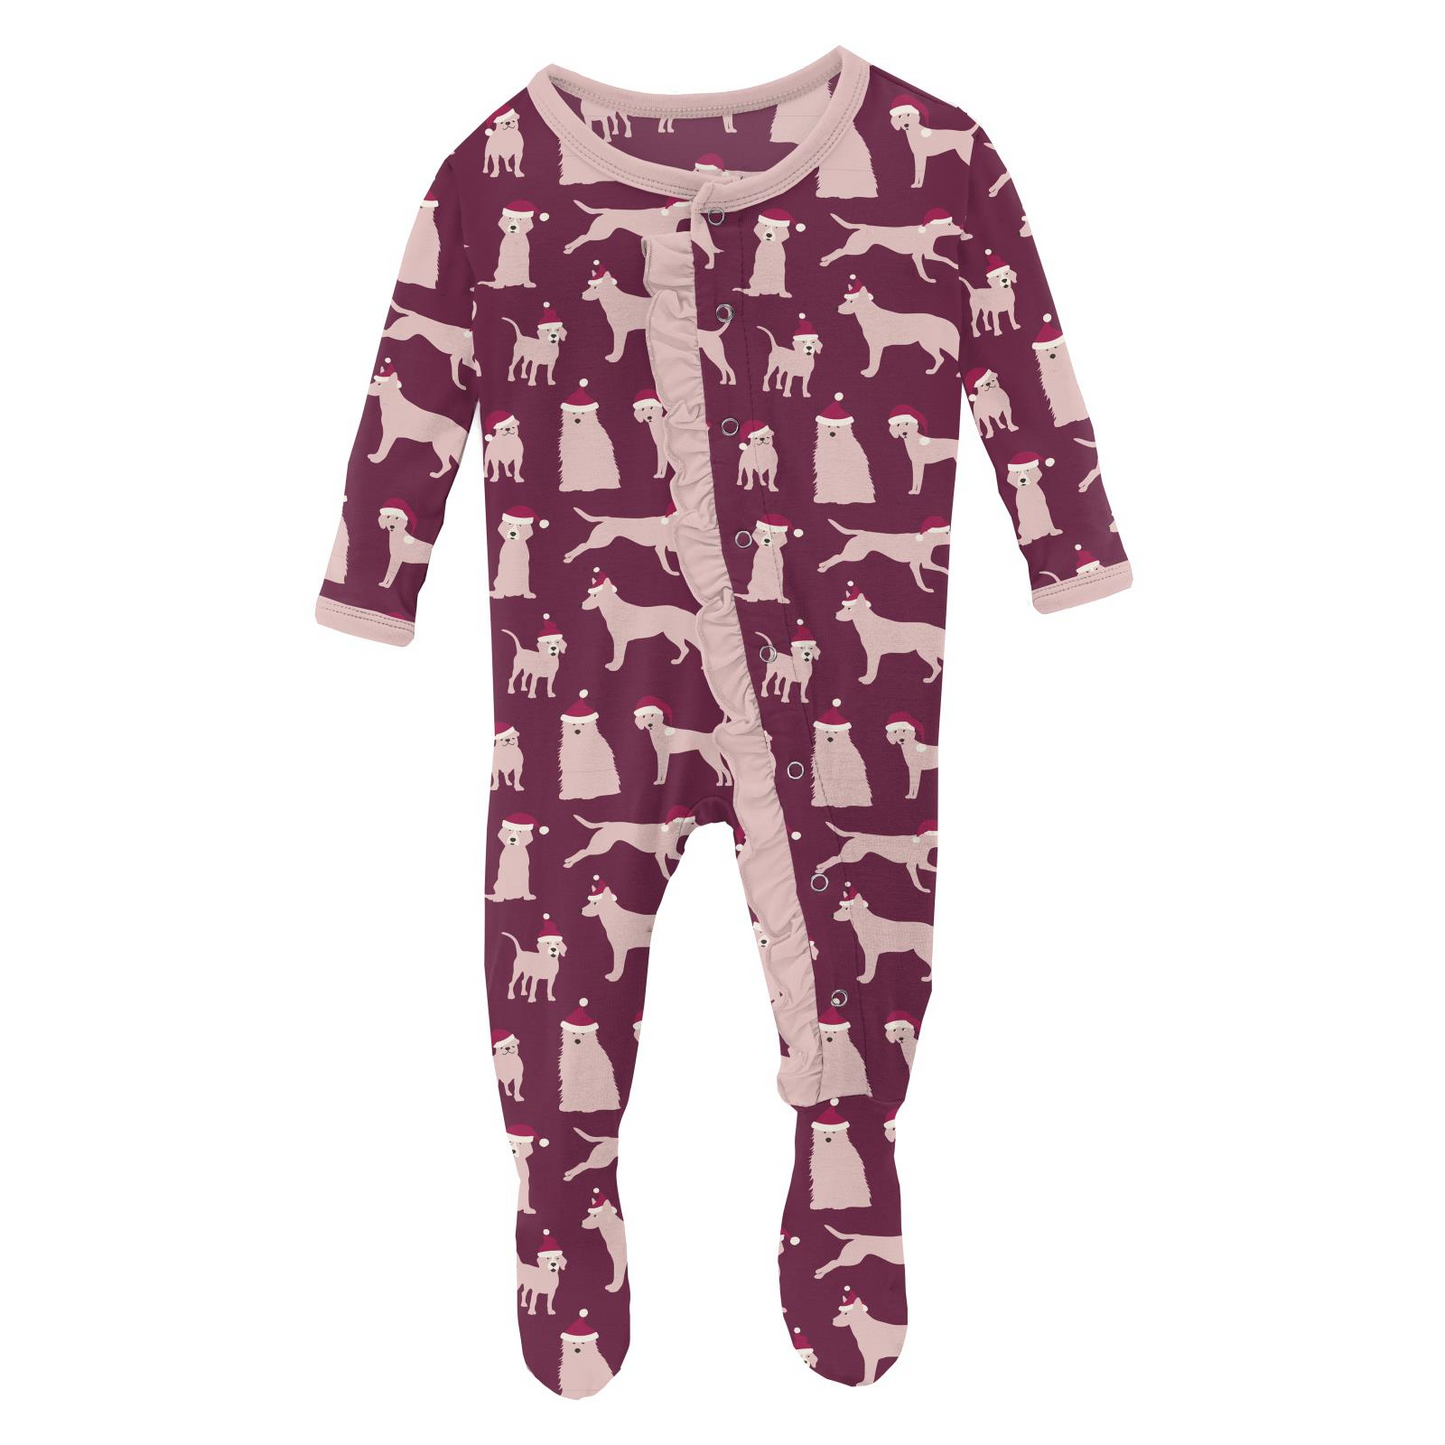 Kickee Pants Print Classic Ruffle Footie with Snaps: Melody Santa Dogs